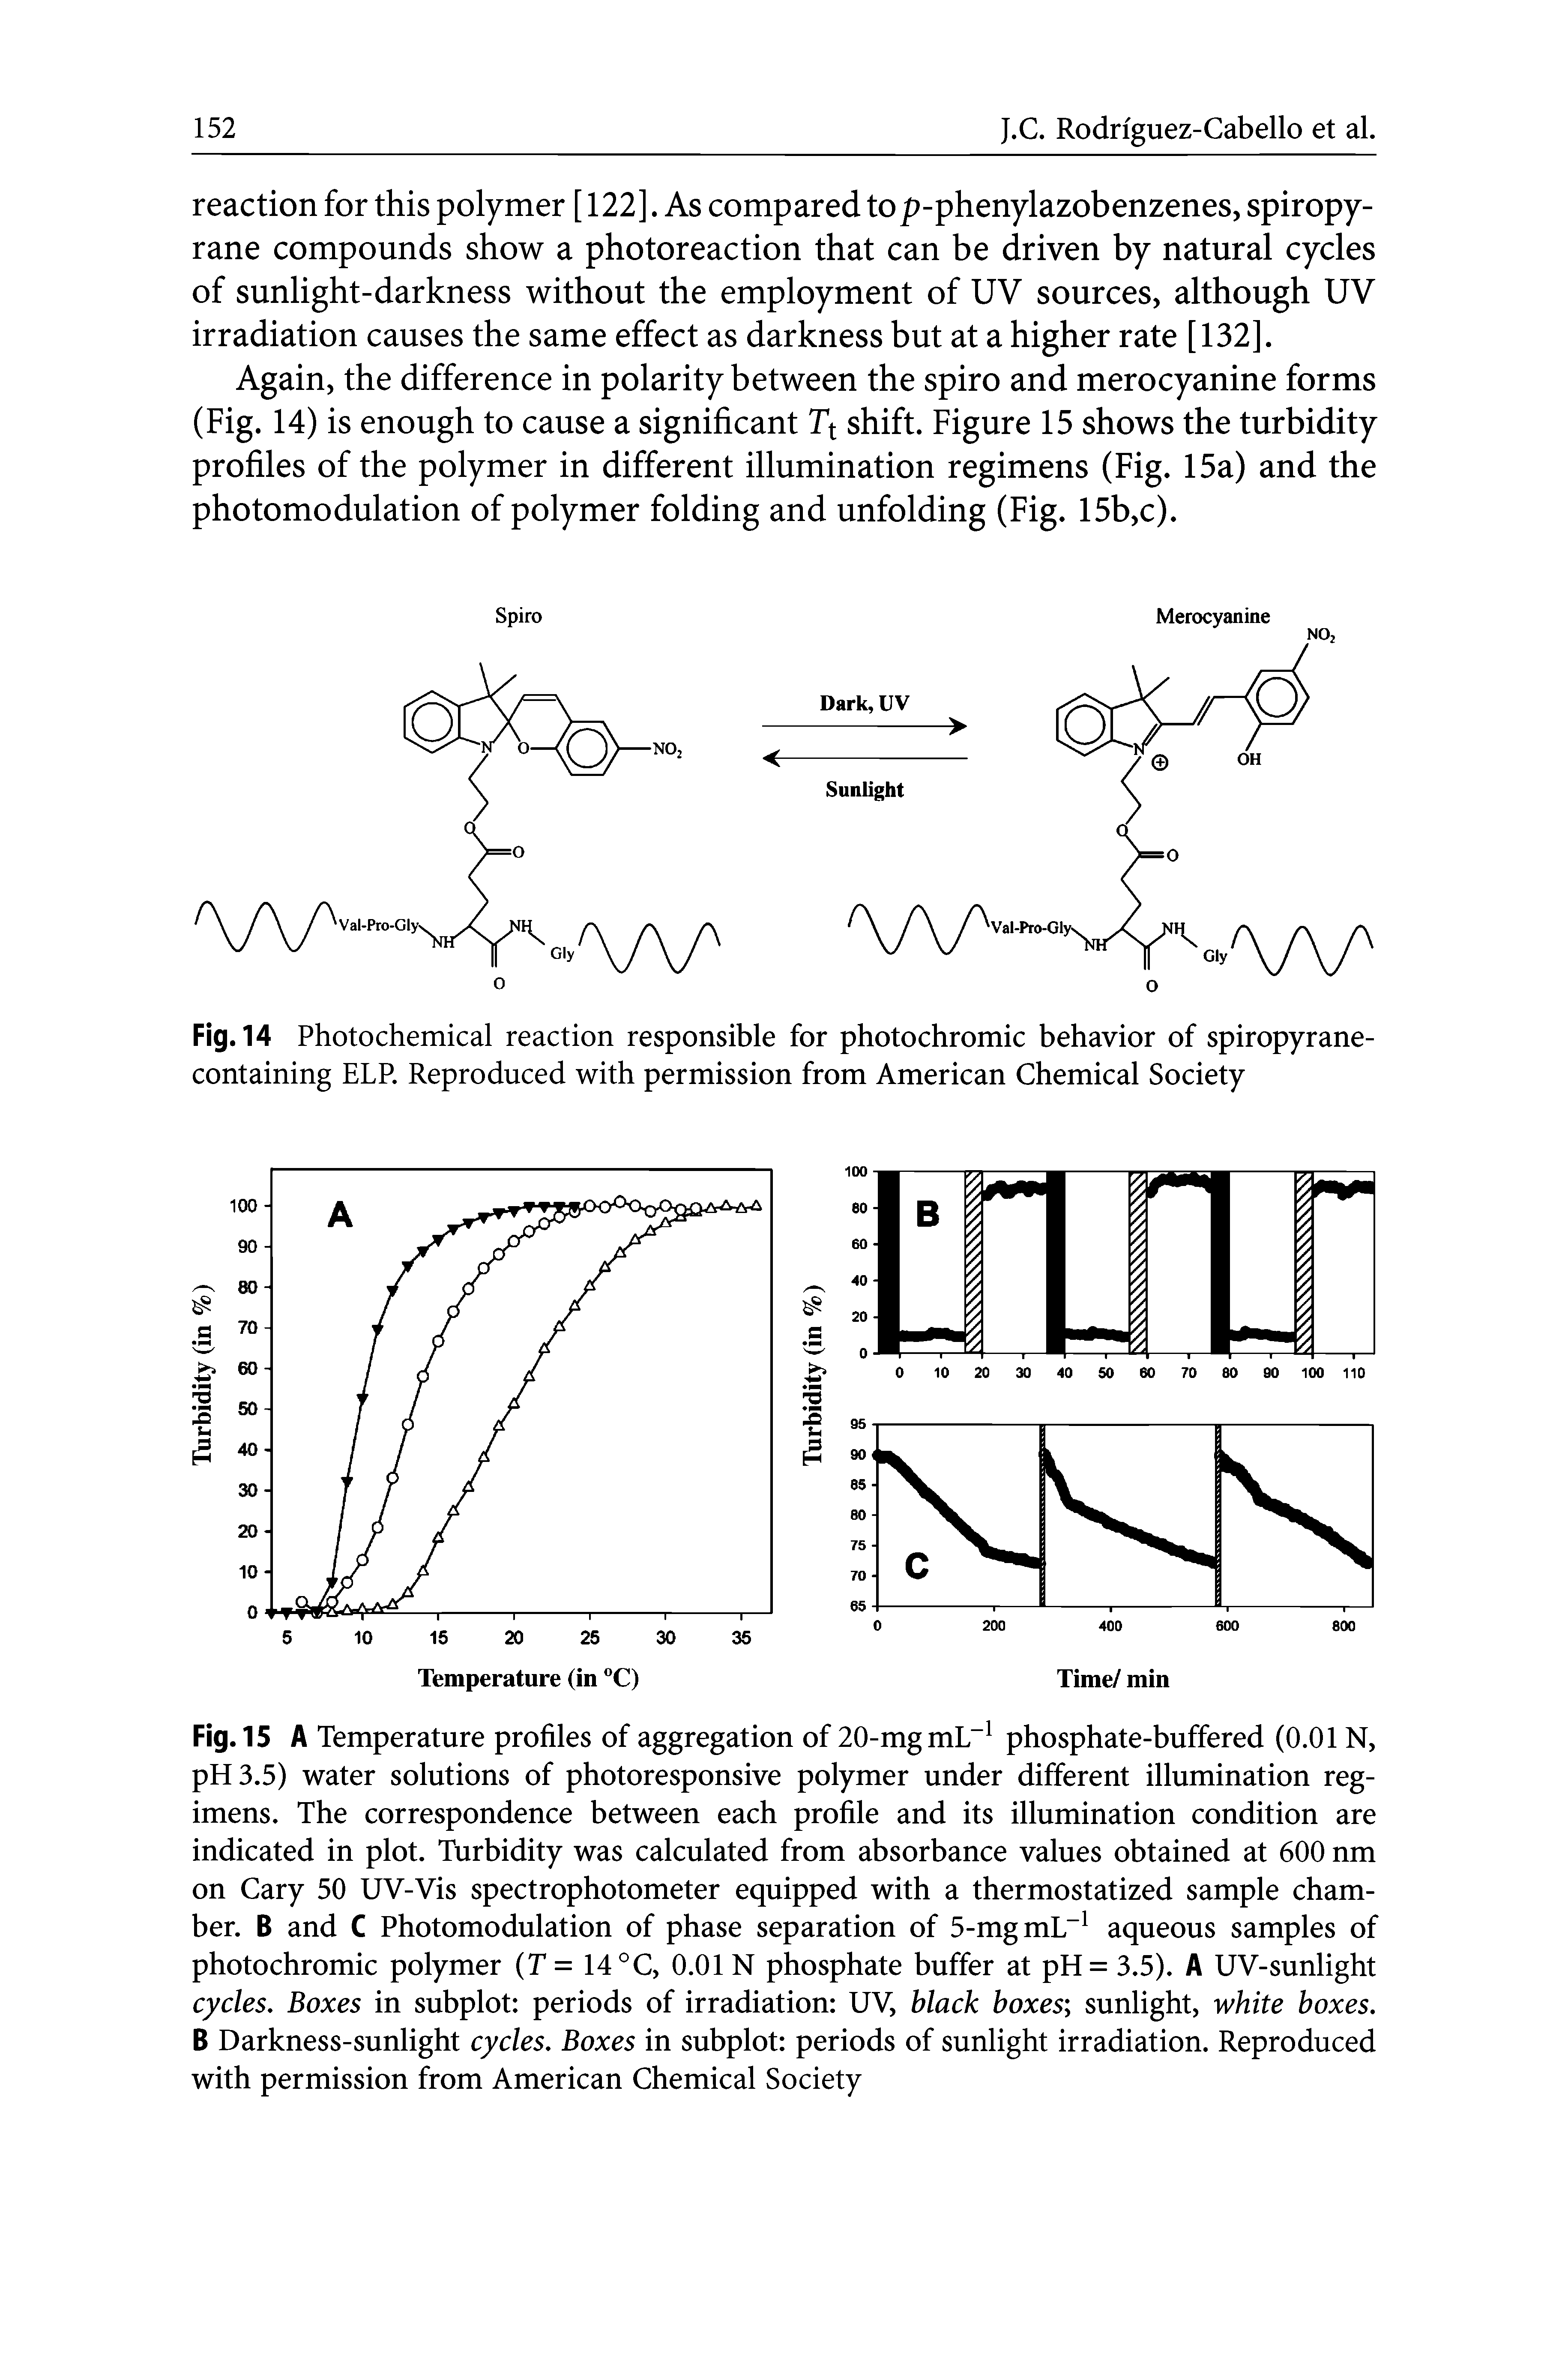 Fig. 14 Photochemical reaction responsible for photochromic behavior of spiropyrane-containing ELP. Reproduced with permission from American Chemical Society...